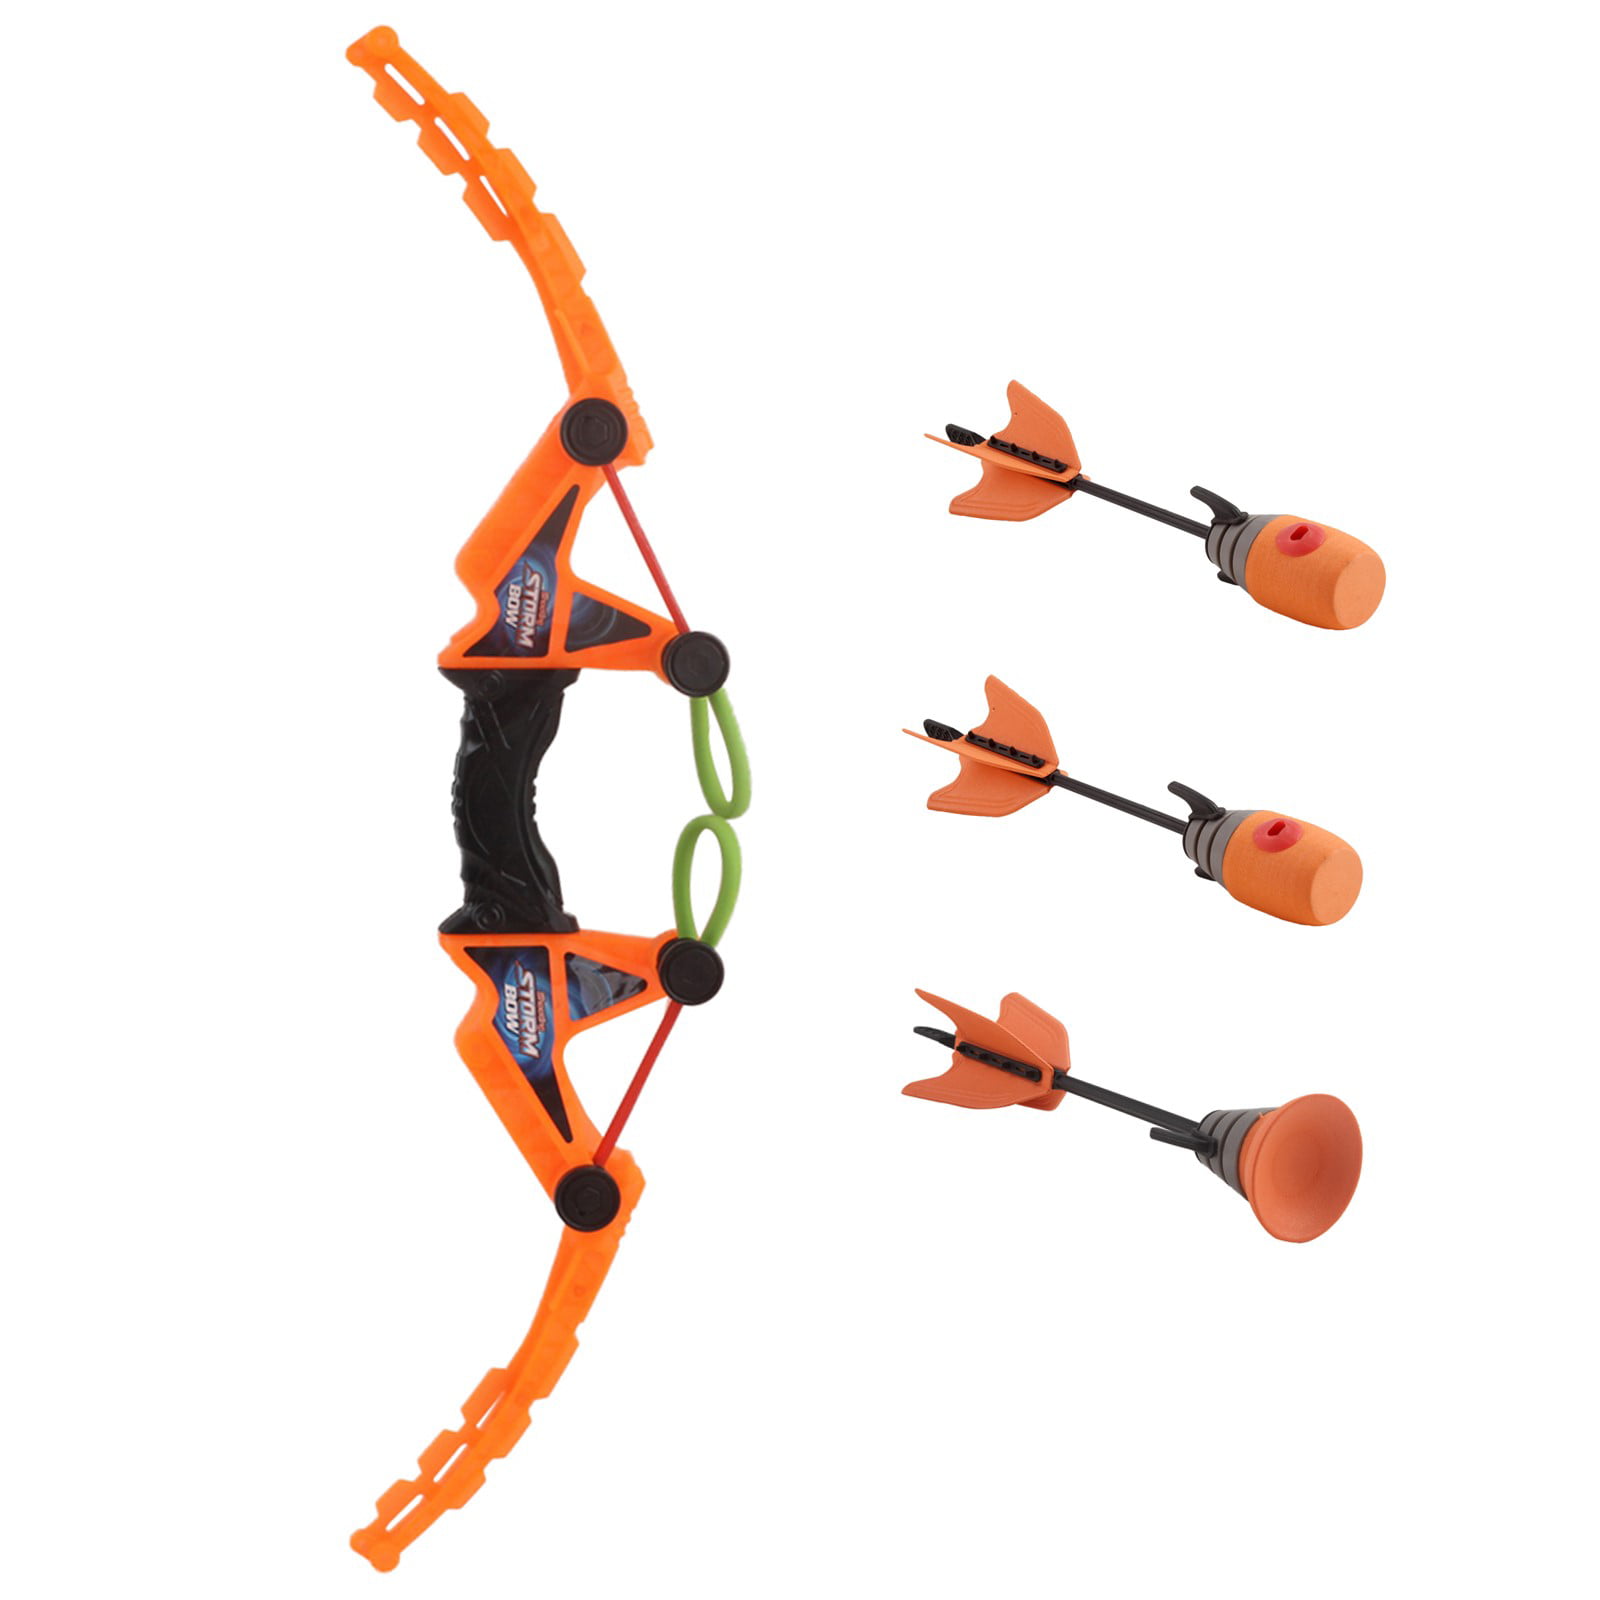 Vokodo Storm Bow Fast Load With 1 Suction Cup And 2 Whistle Arrows Fun Archery Active Play Indoor Outdoor Activity Target Practice Action Sports Shooting Games Great Gift For Older Children Boys